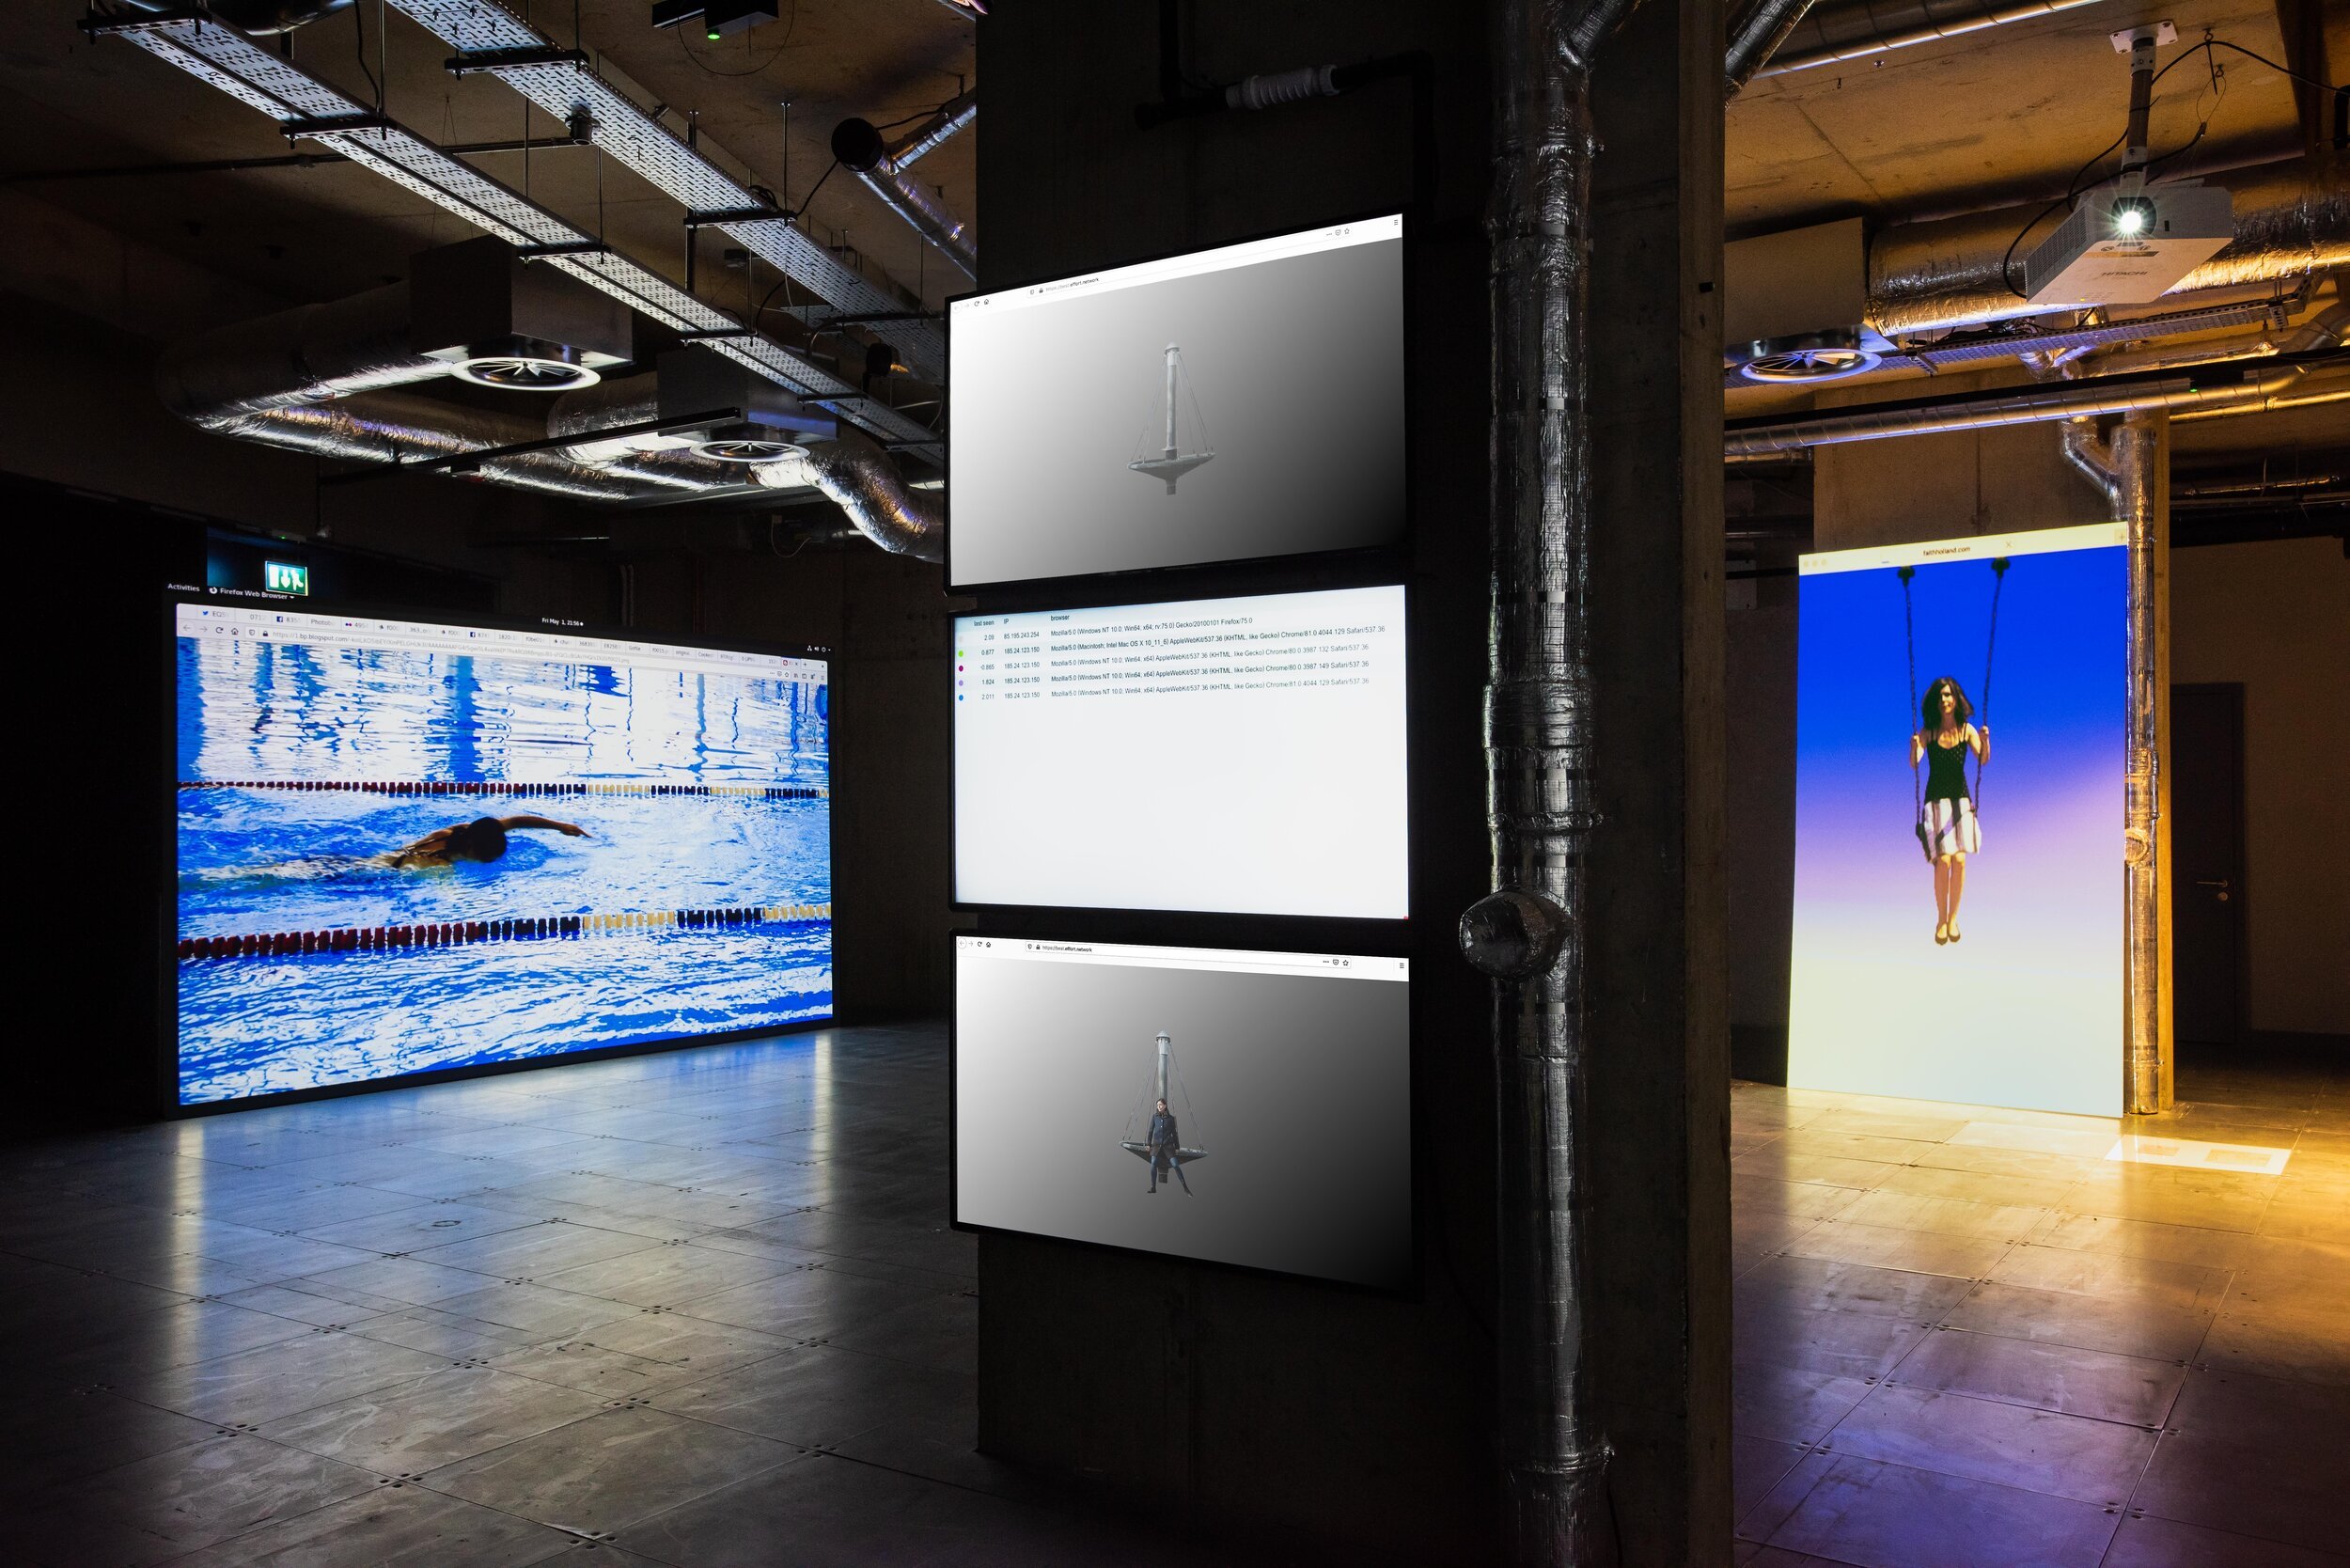 Olia Lialina, Best Effort Network, 2020. Installation view, arebyte Gallery, London. Image: Max Colson.